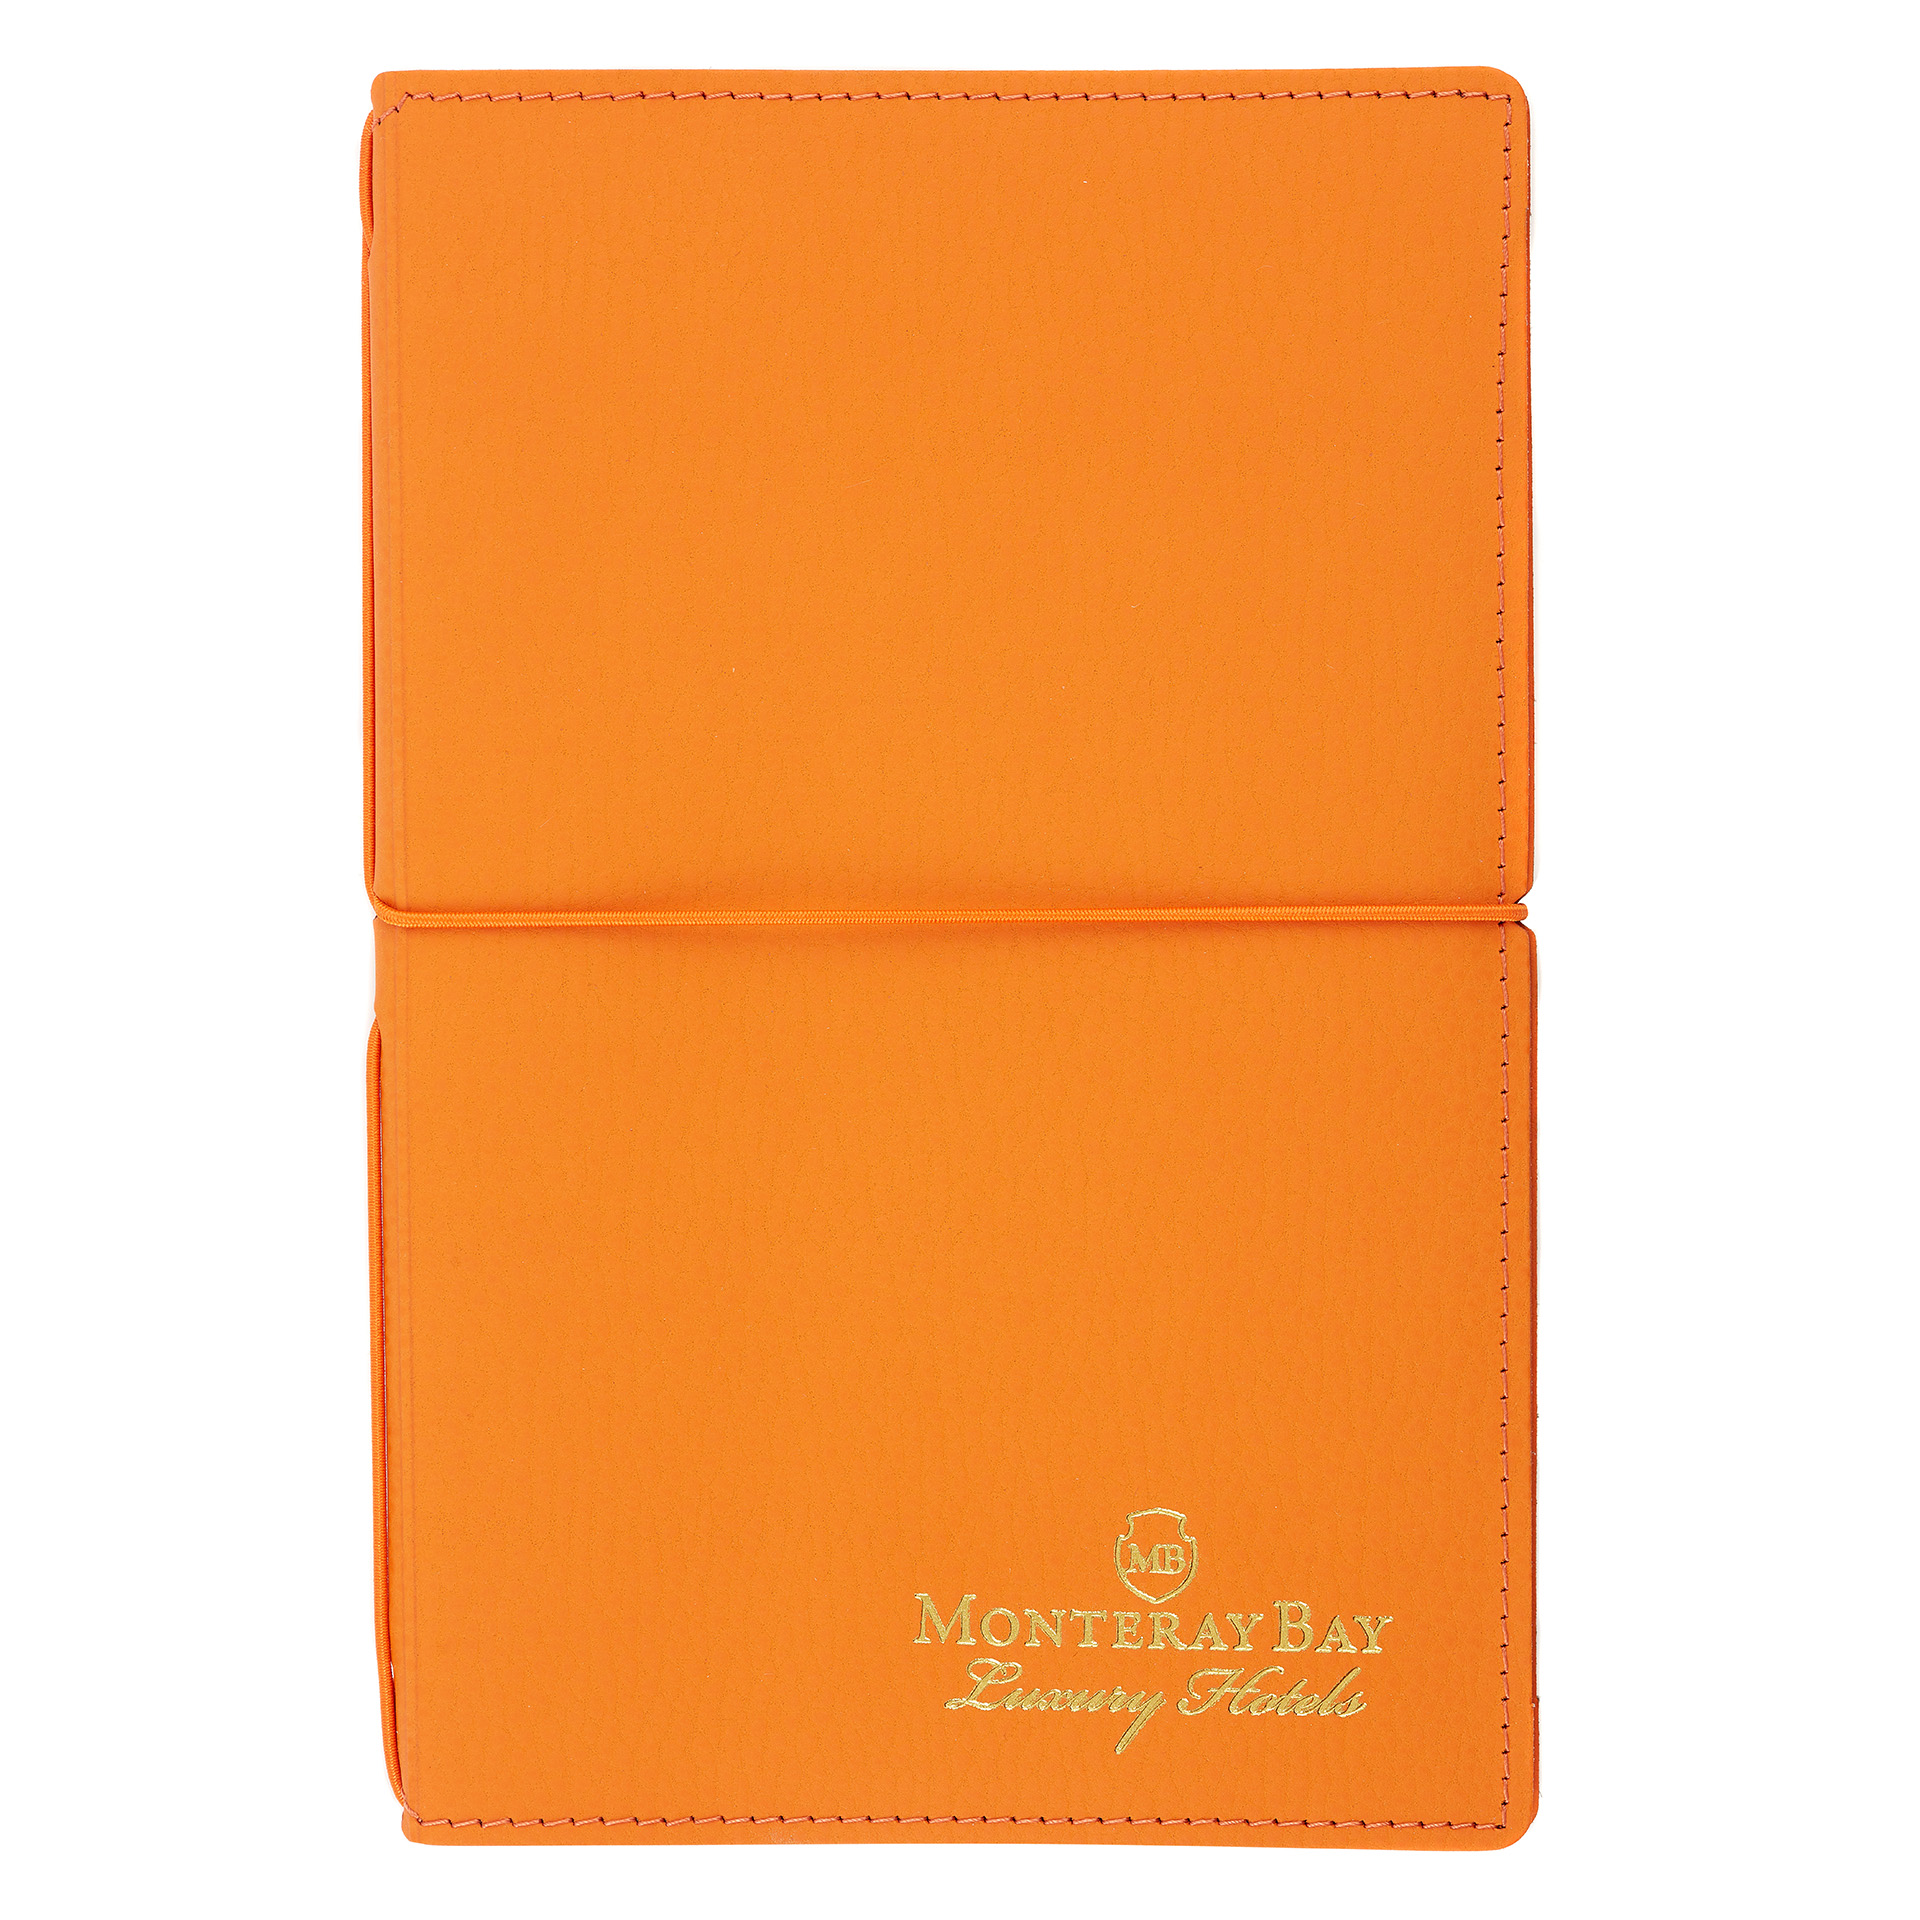 Stylish refillable journal with covers made from recycled leather fibres which are Oekotex certified. Made in the EU, this notebook is beautifully crafted and has a "textured leather" cover. Comes with a refillable insert (64 pages) of ivory sustainable paper. LINED, PLAIN or DOTTED options are available. Available in 4 modern colours. Orange